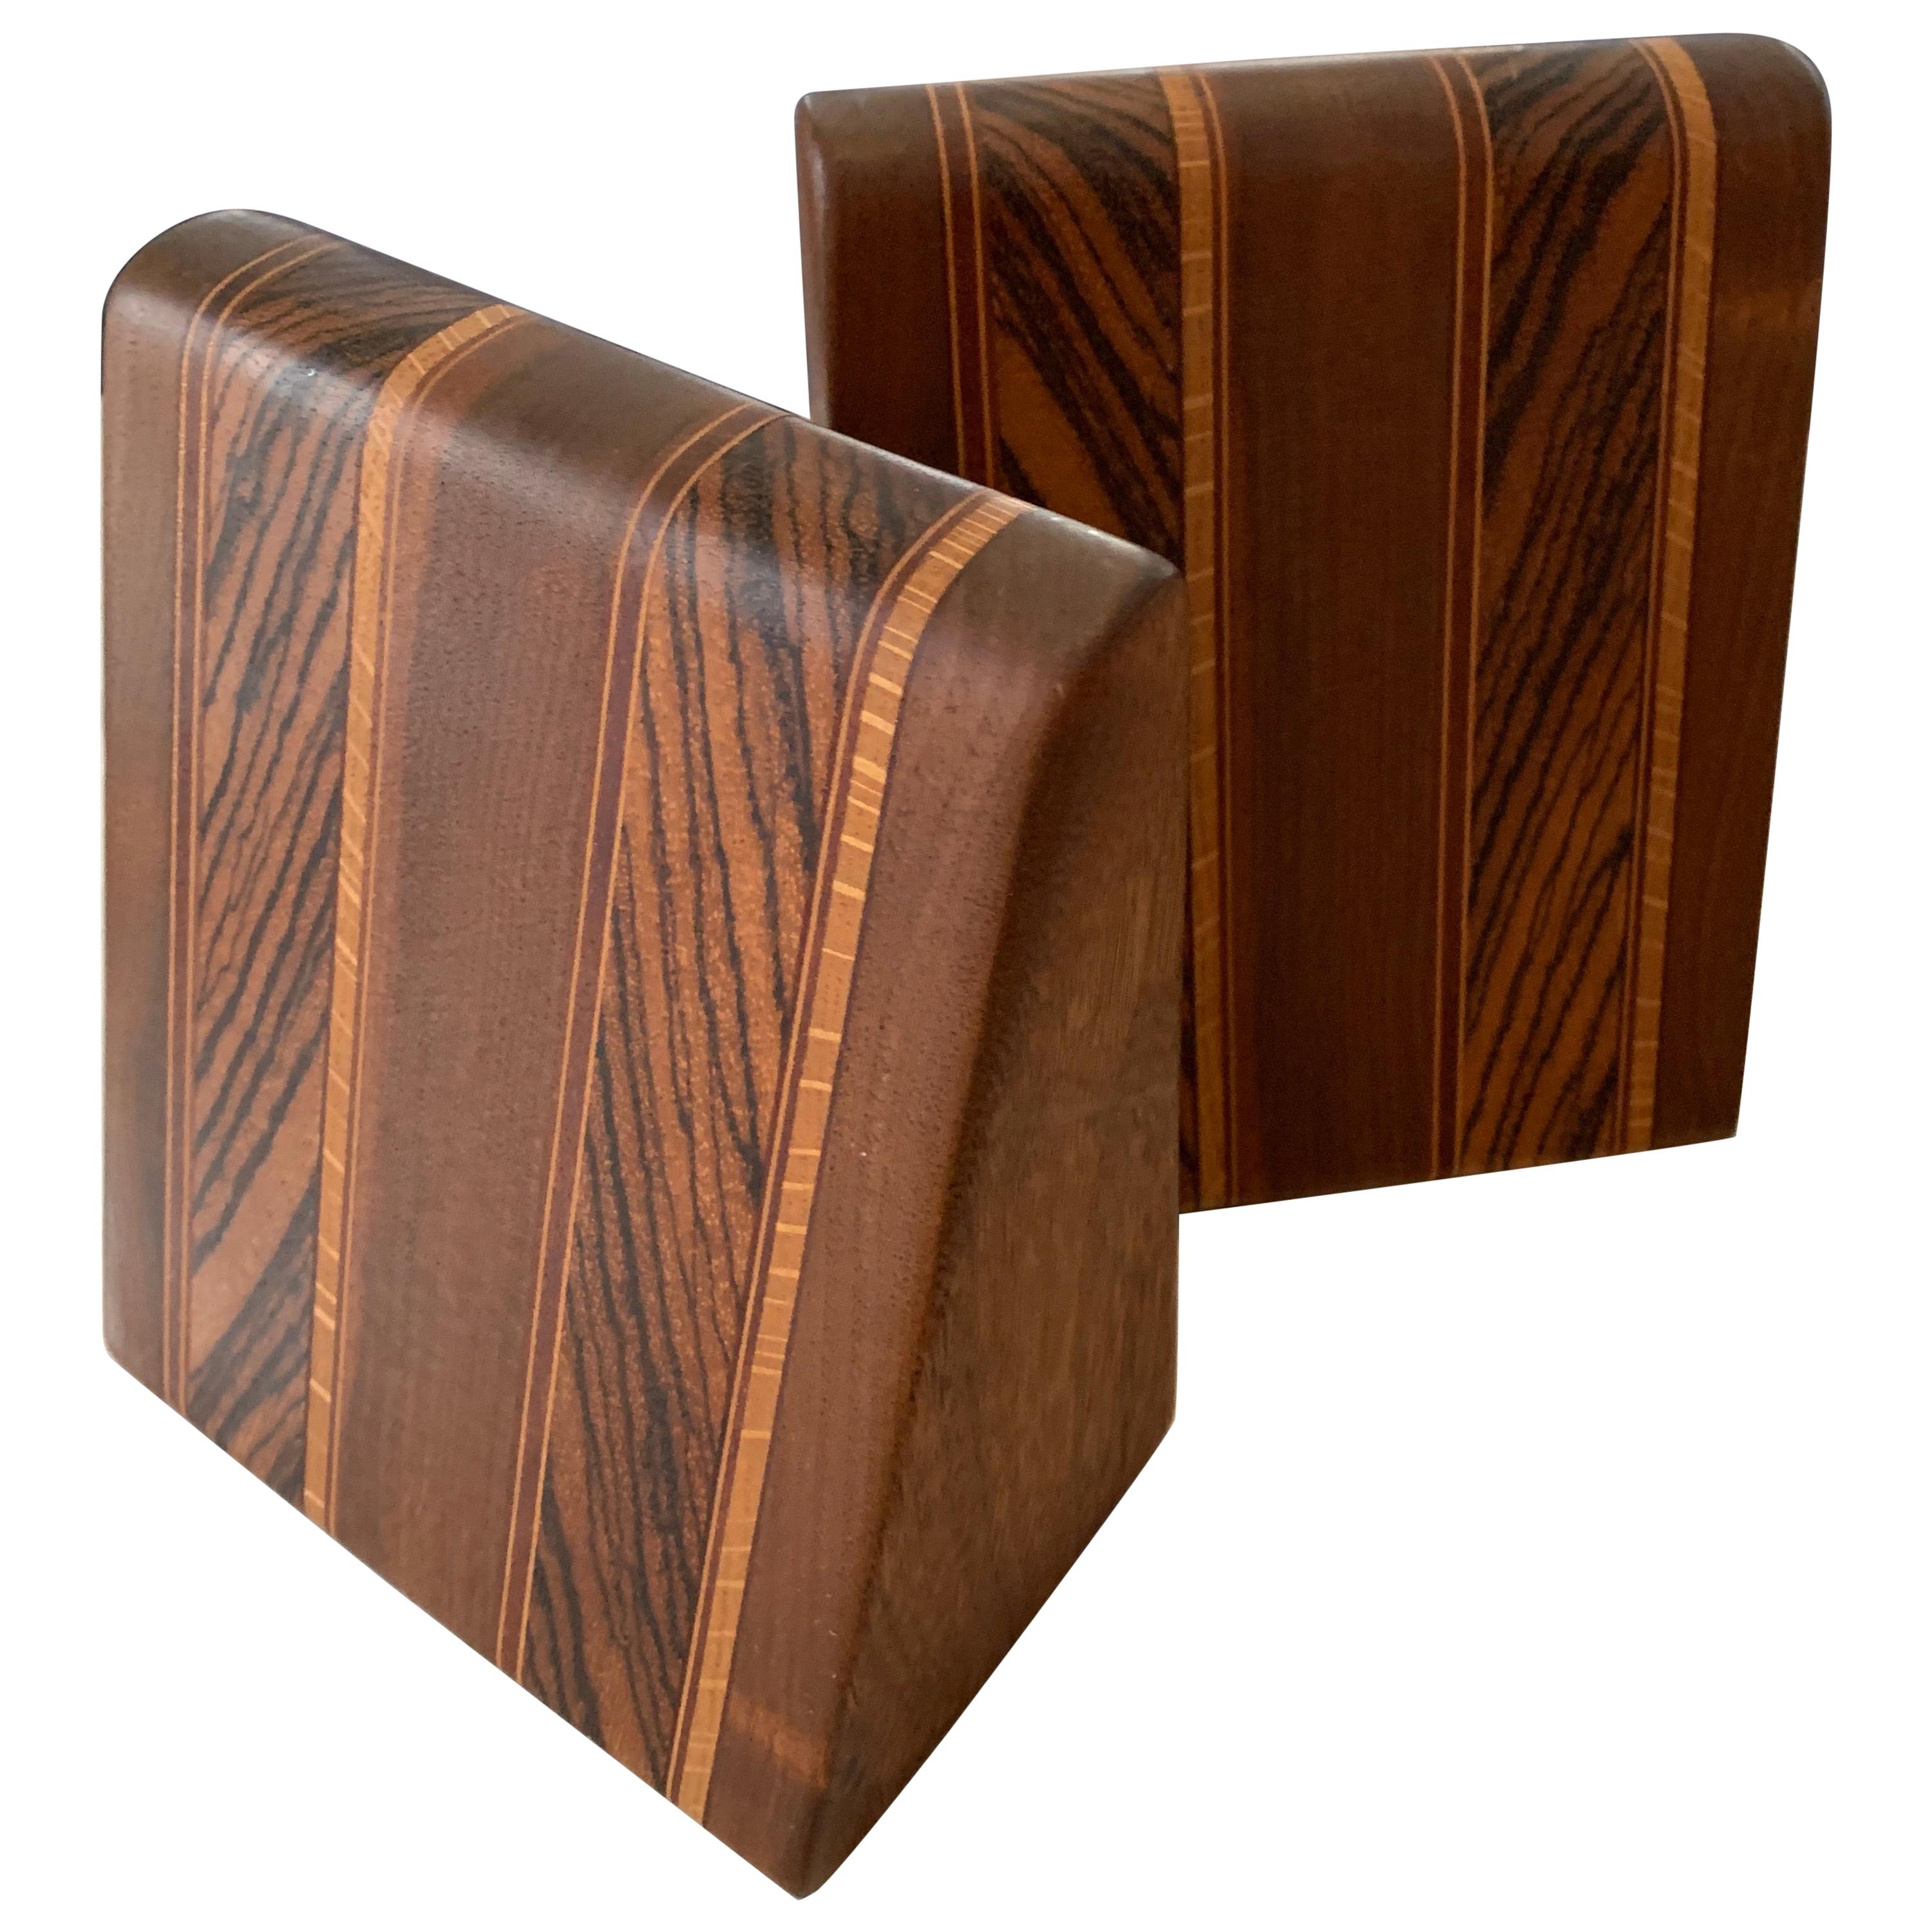 Angular Inlay Patterned Wooden Bookends with Metal Slide